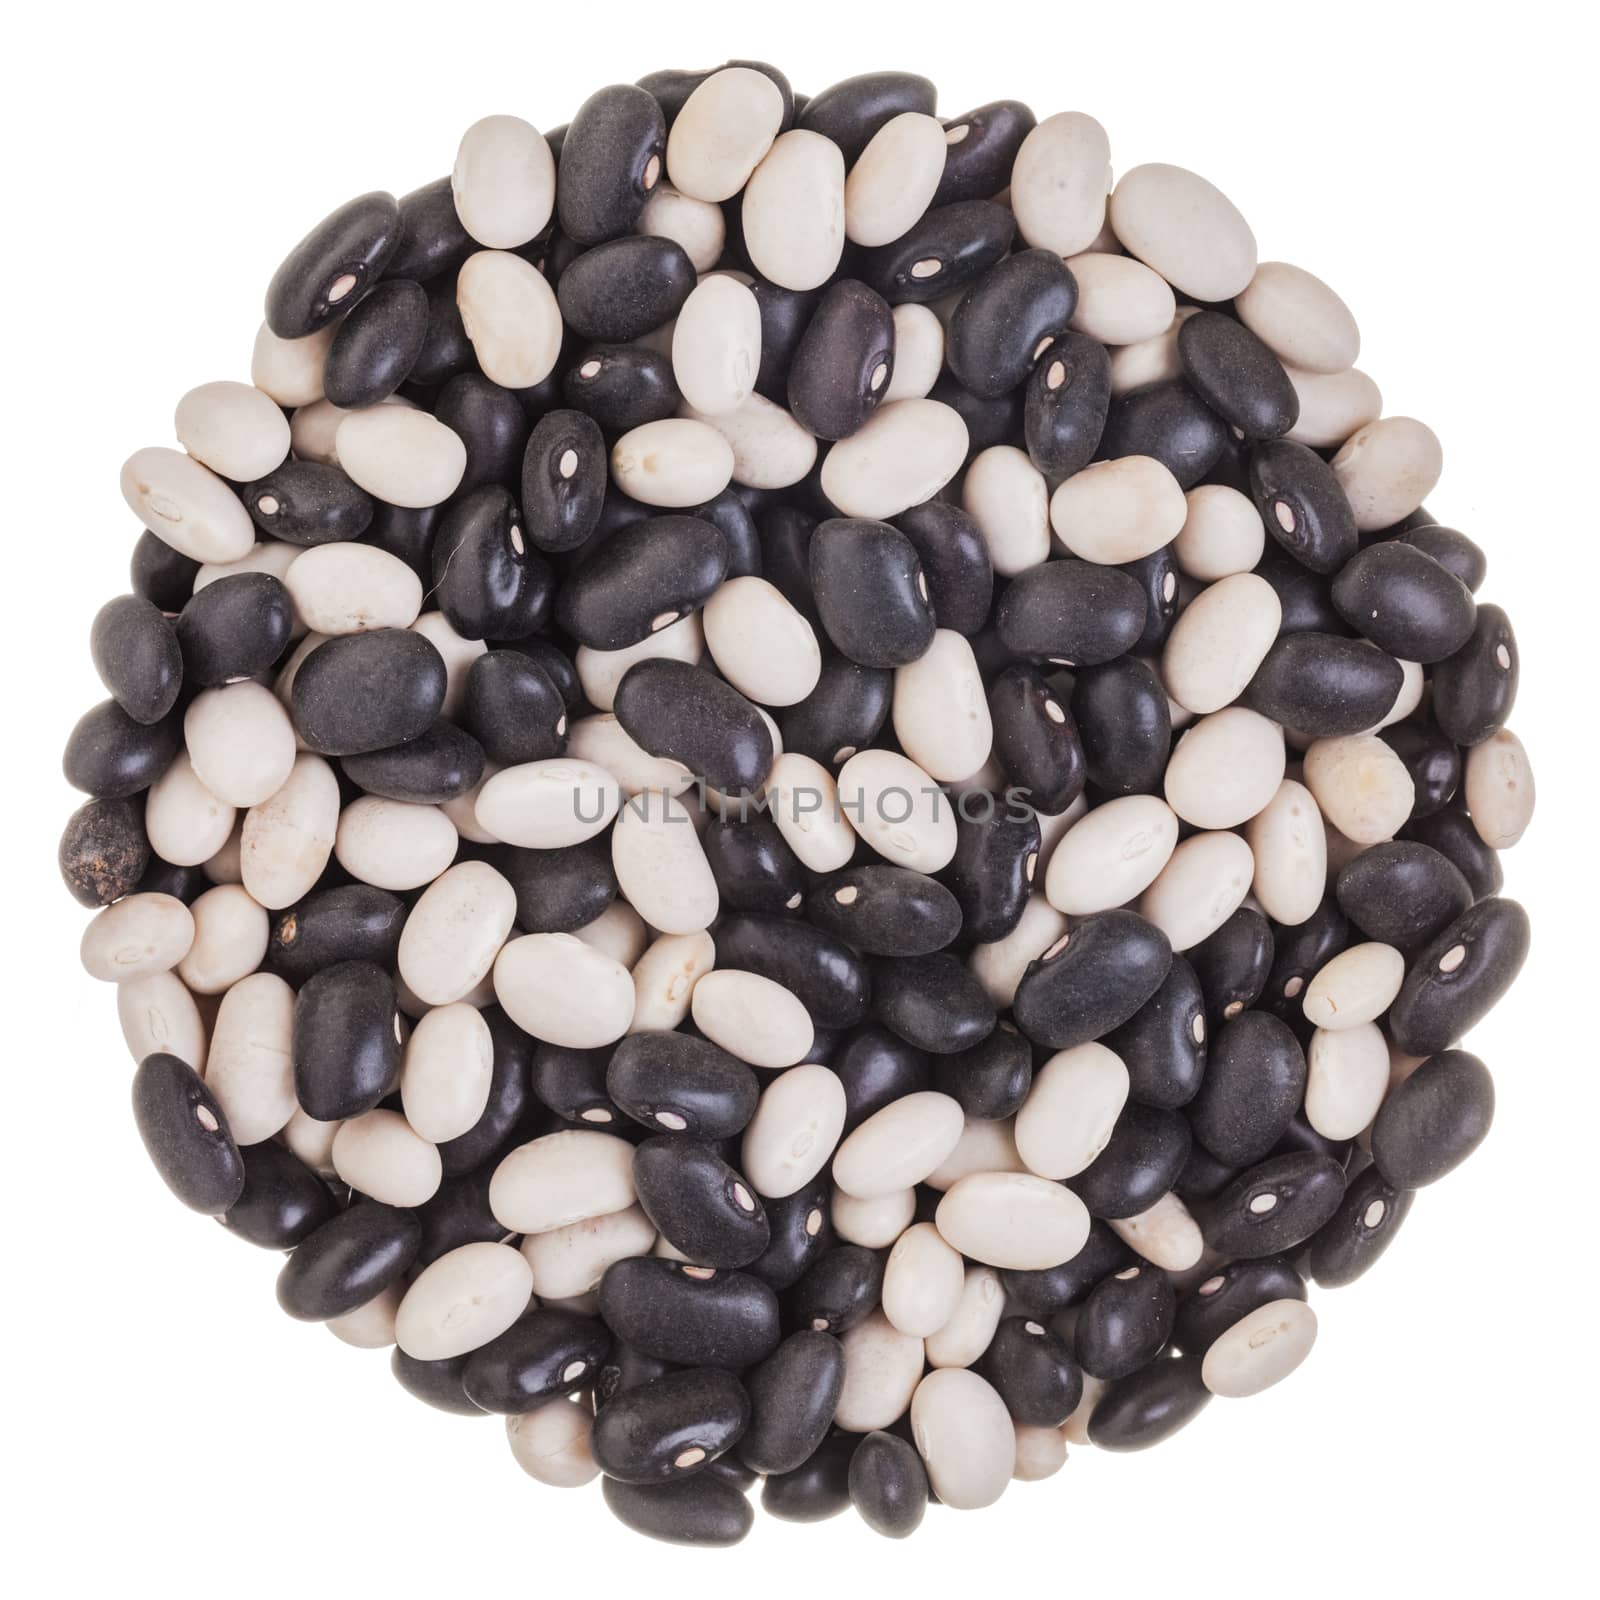 Perfect Circle Texture of Black and White Beans